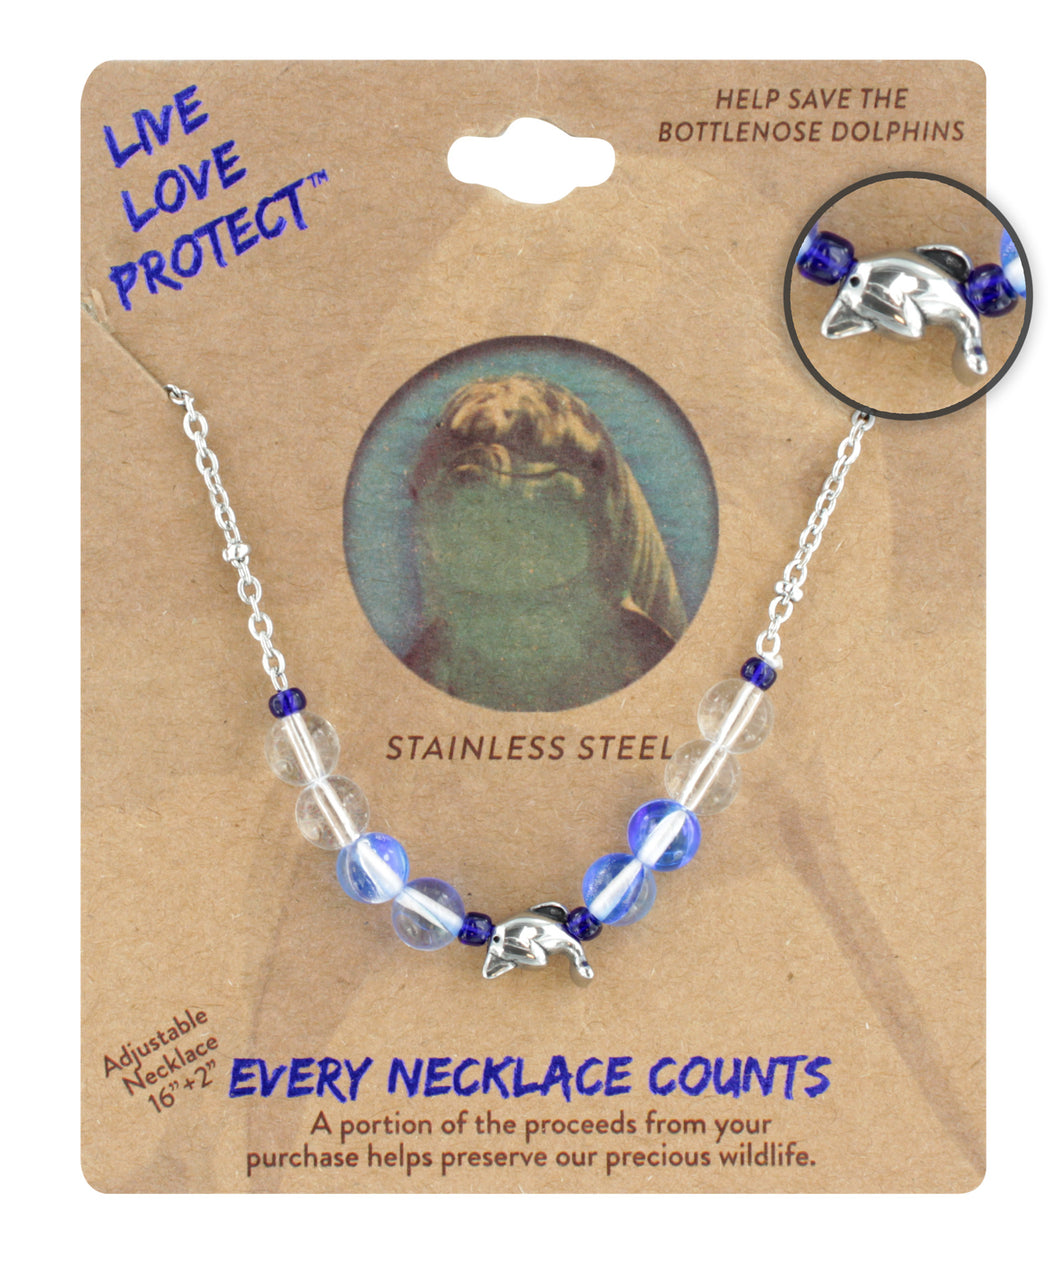 LIVE LOVE PROTECT™ - DOLPHIN CONSERVATION NECKLACE